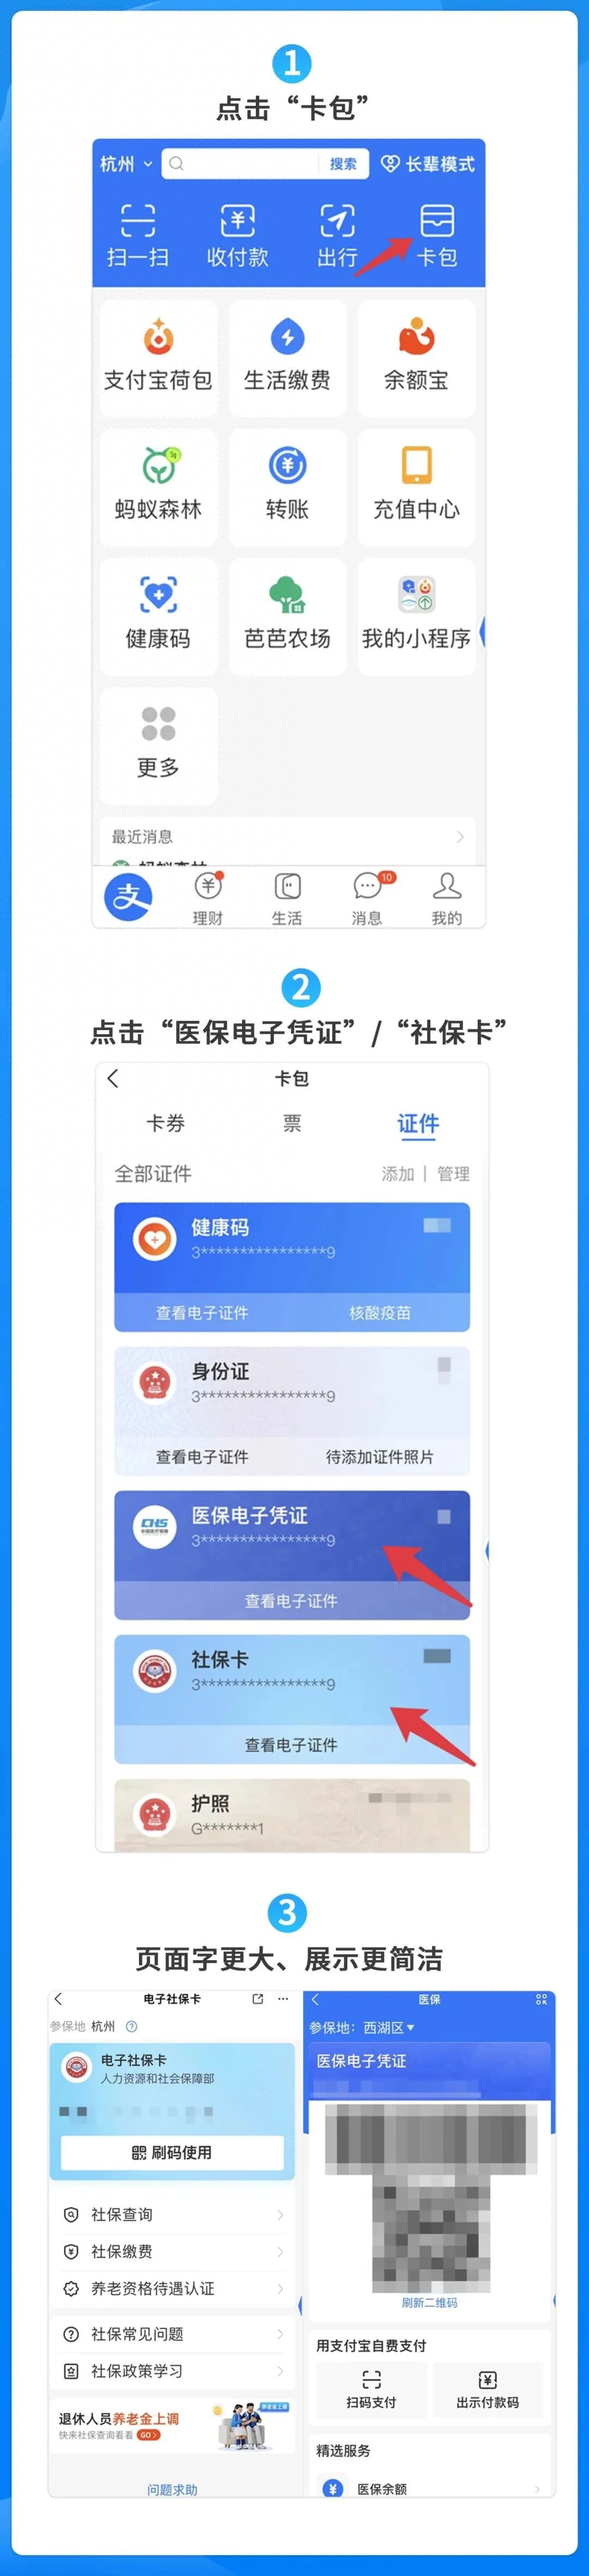 Alipay elder mode upgrade: social security/medical insurance electronic card fonts are larger and the page is simpler